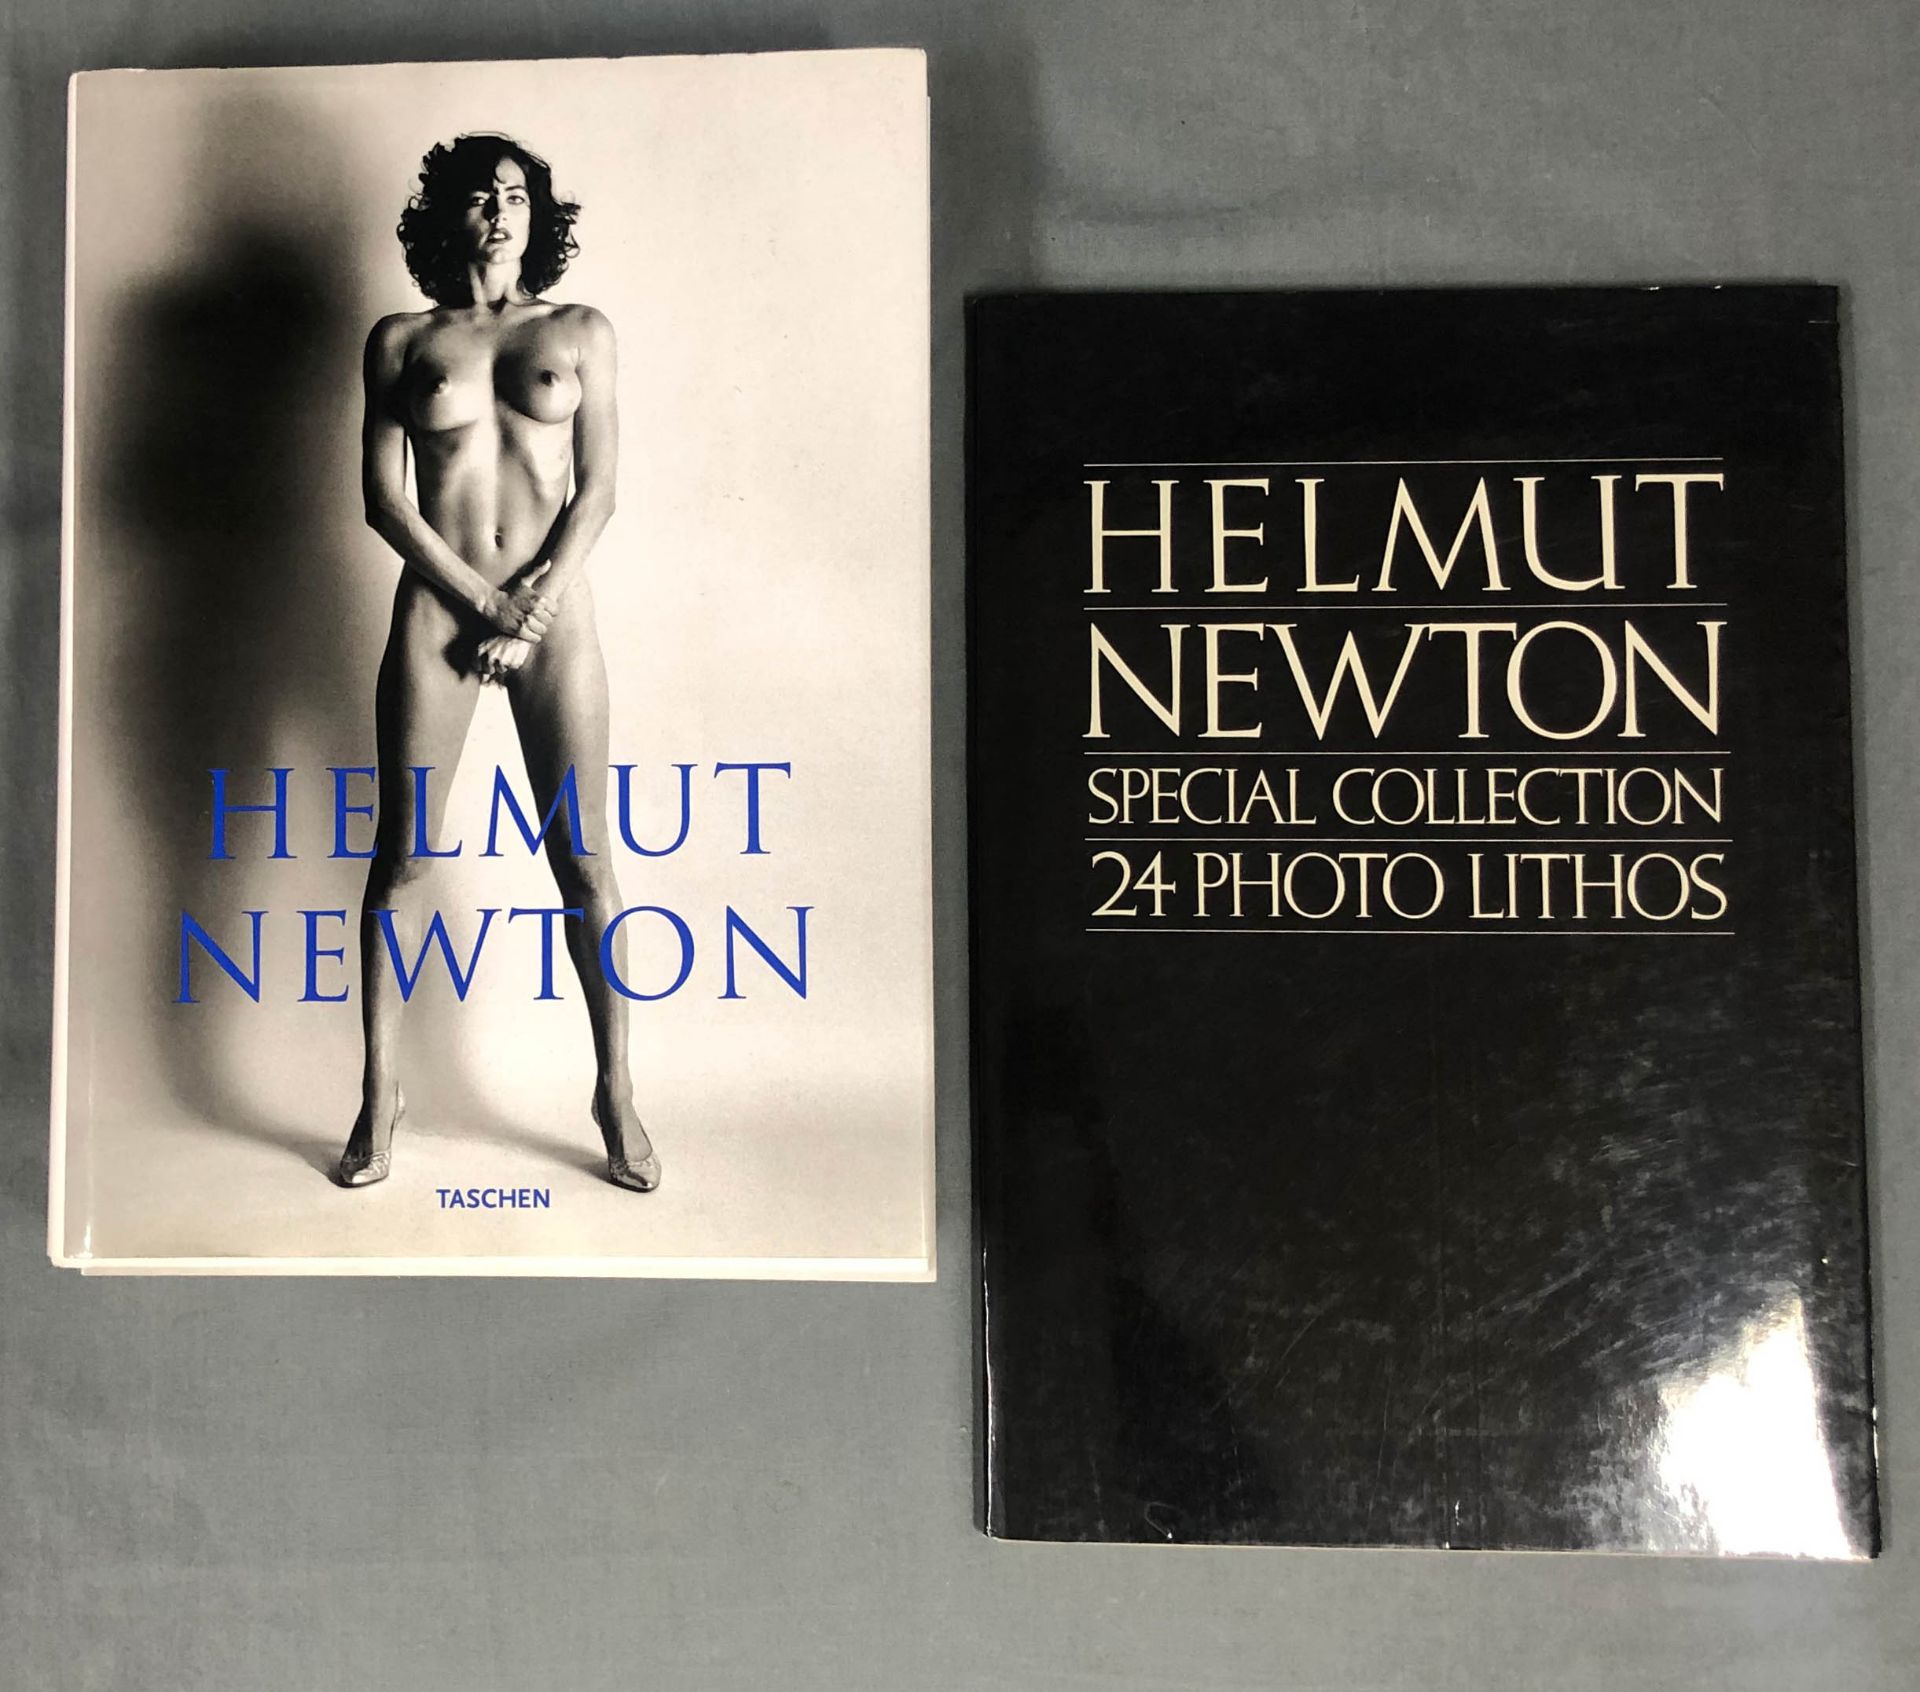 Helmut Newton (1920 - 2004). Special Edition and SUMO.2 books. Up to 40,5 cm x 28 cm.Helmut